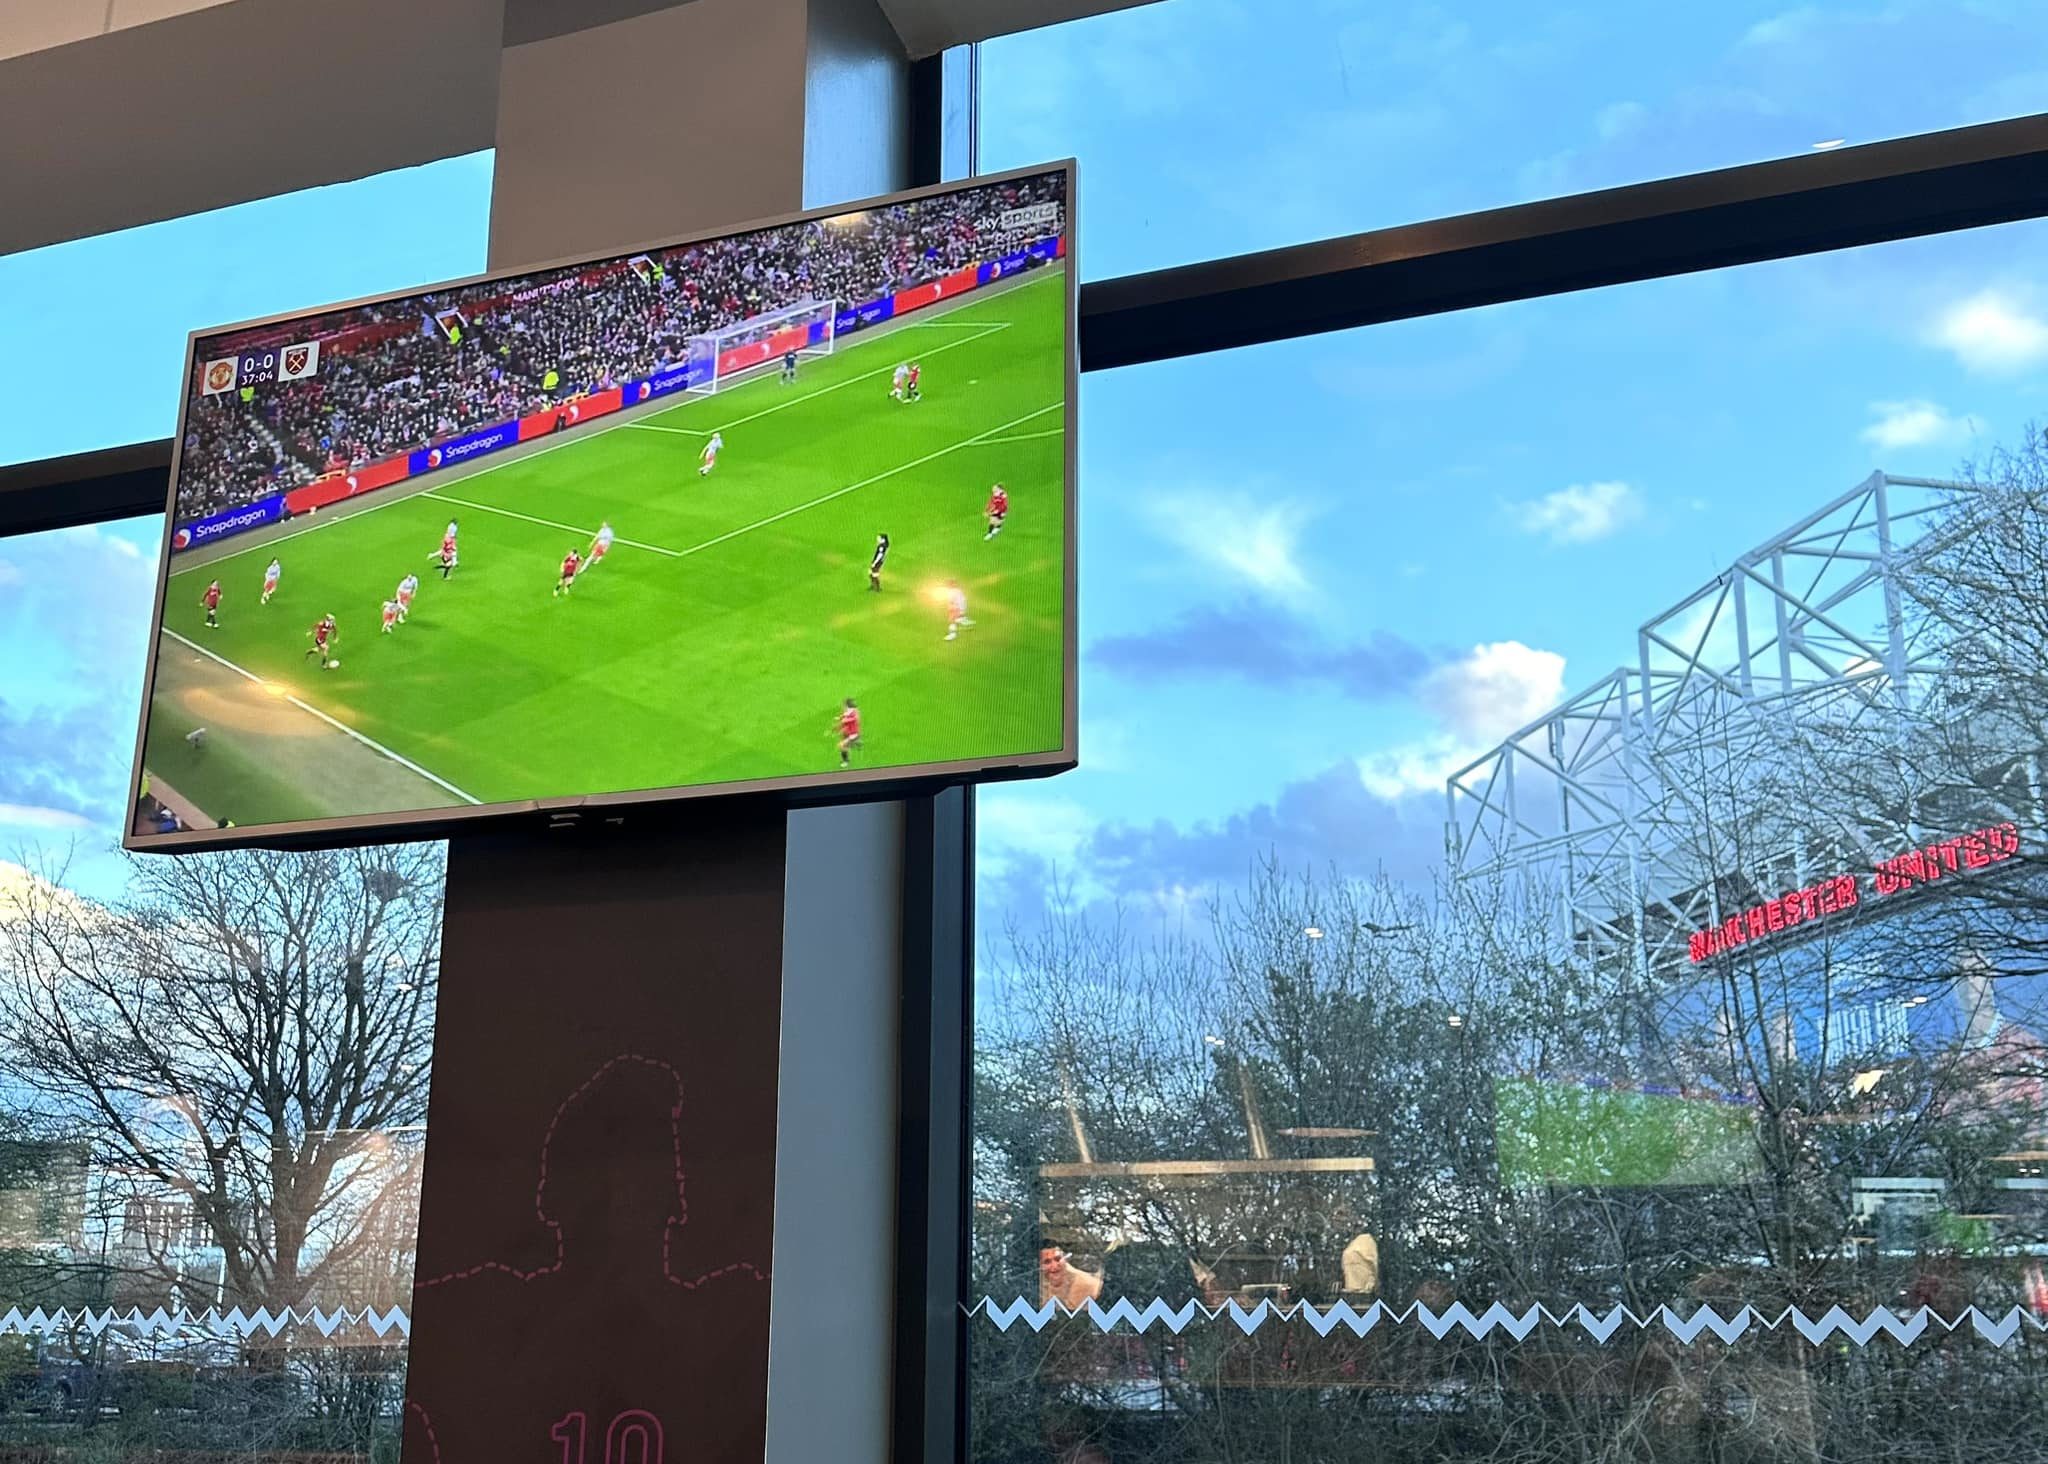 cafe-football-tv-screen-manchester united